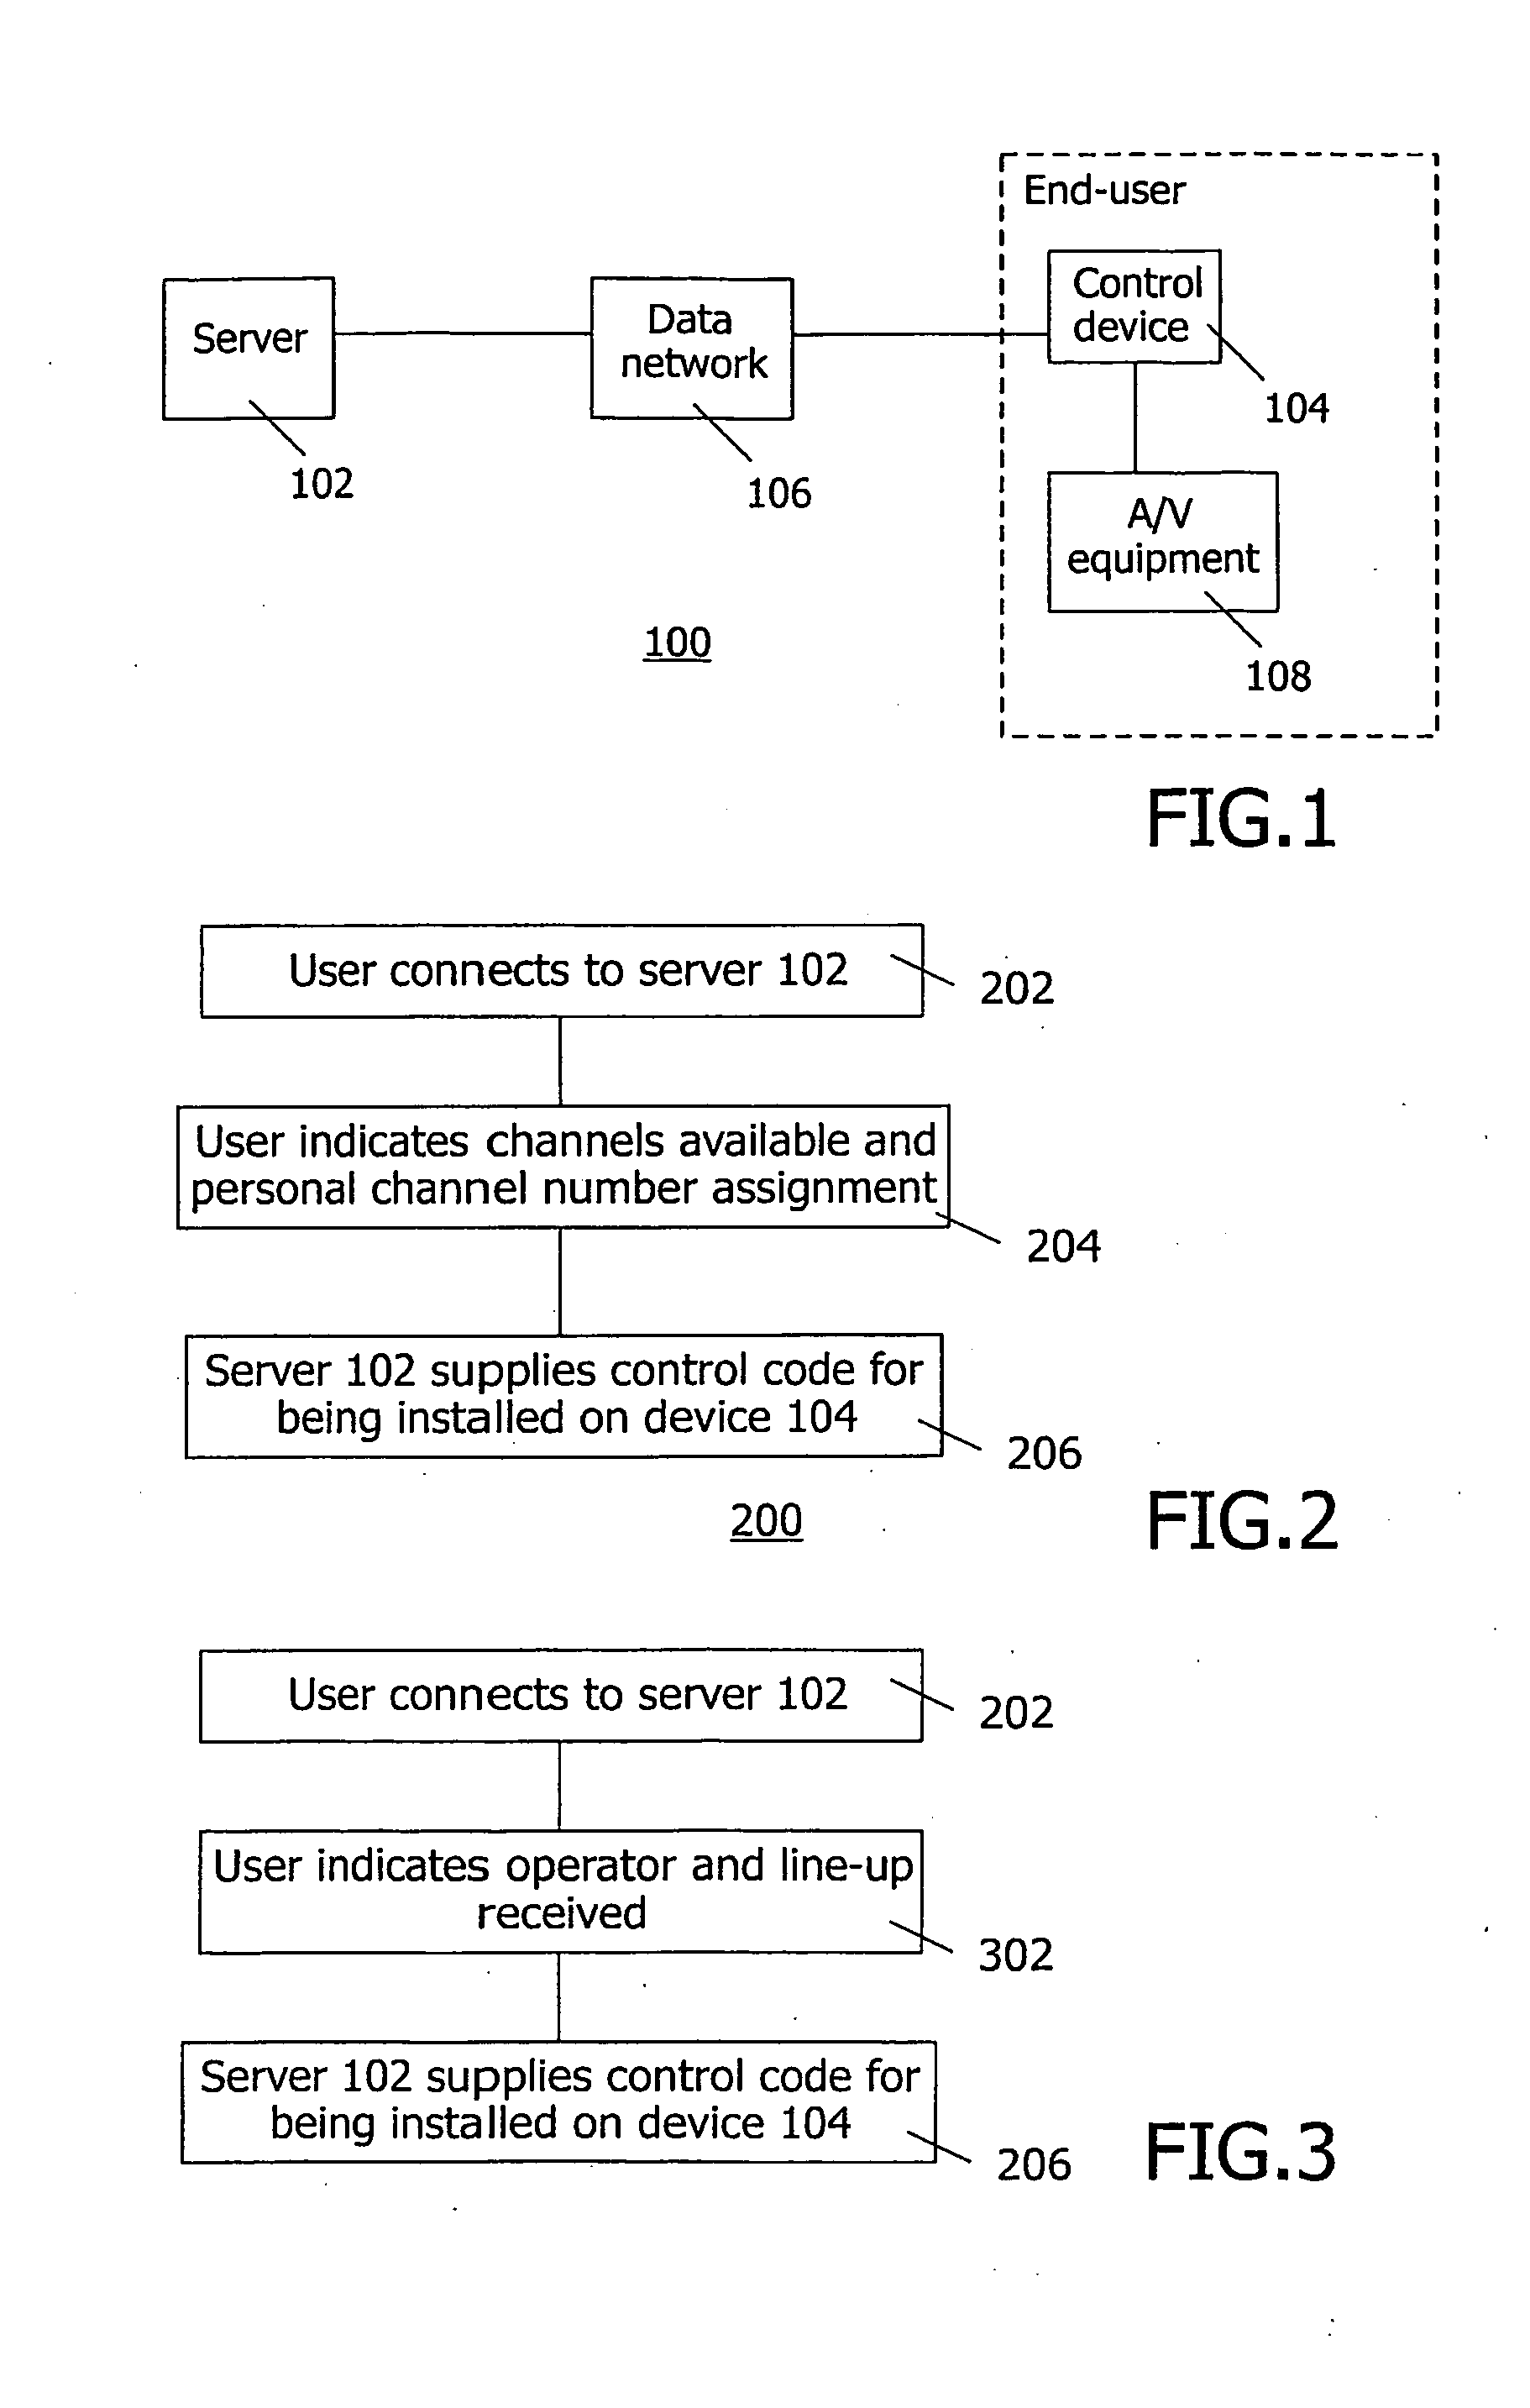 Method for Customizing a User Interface for Selecting Broadcast Sources